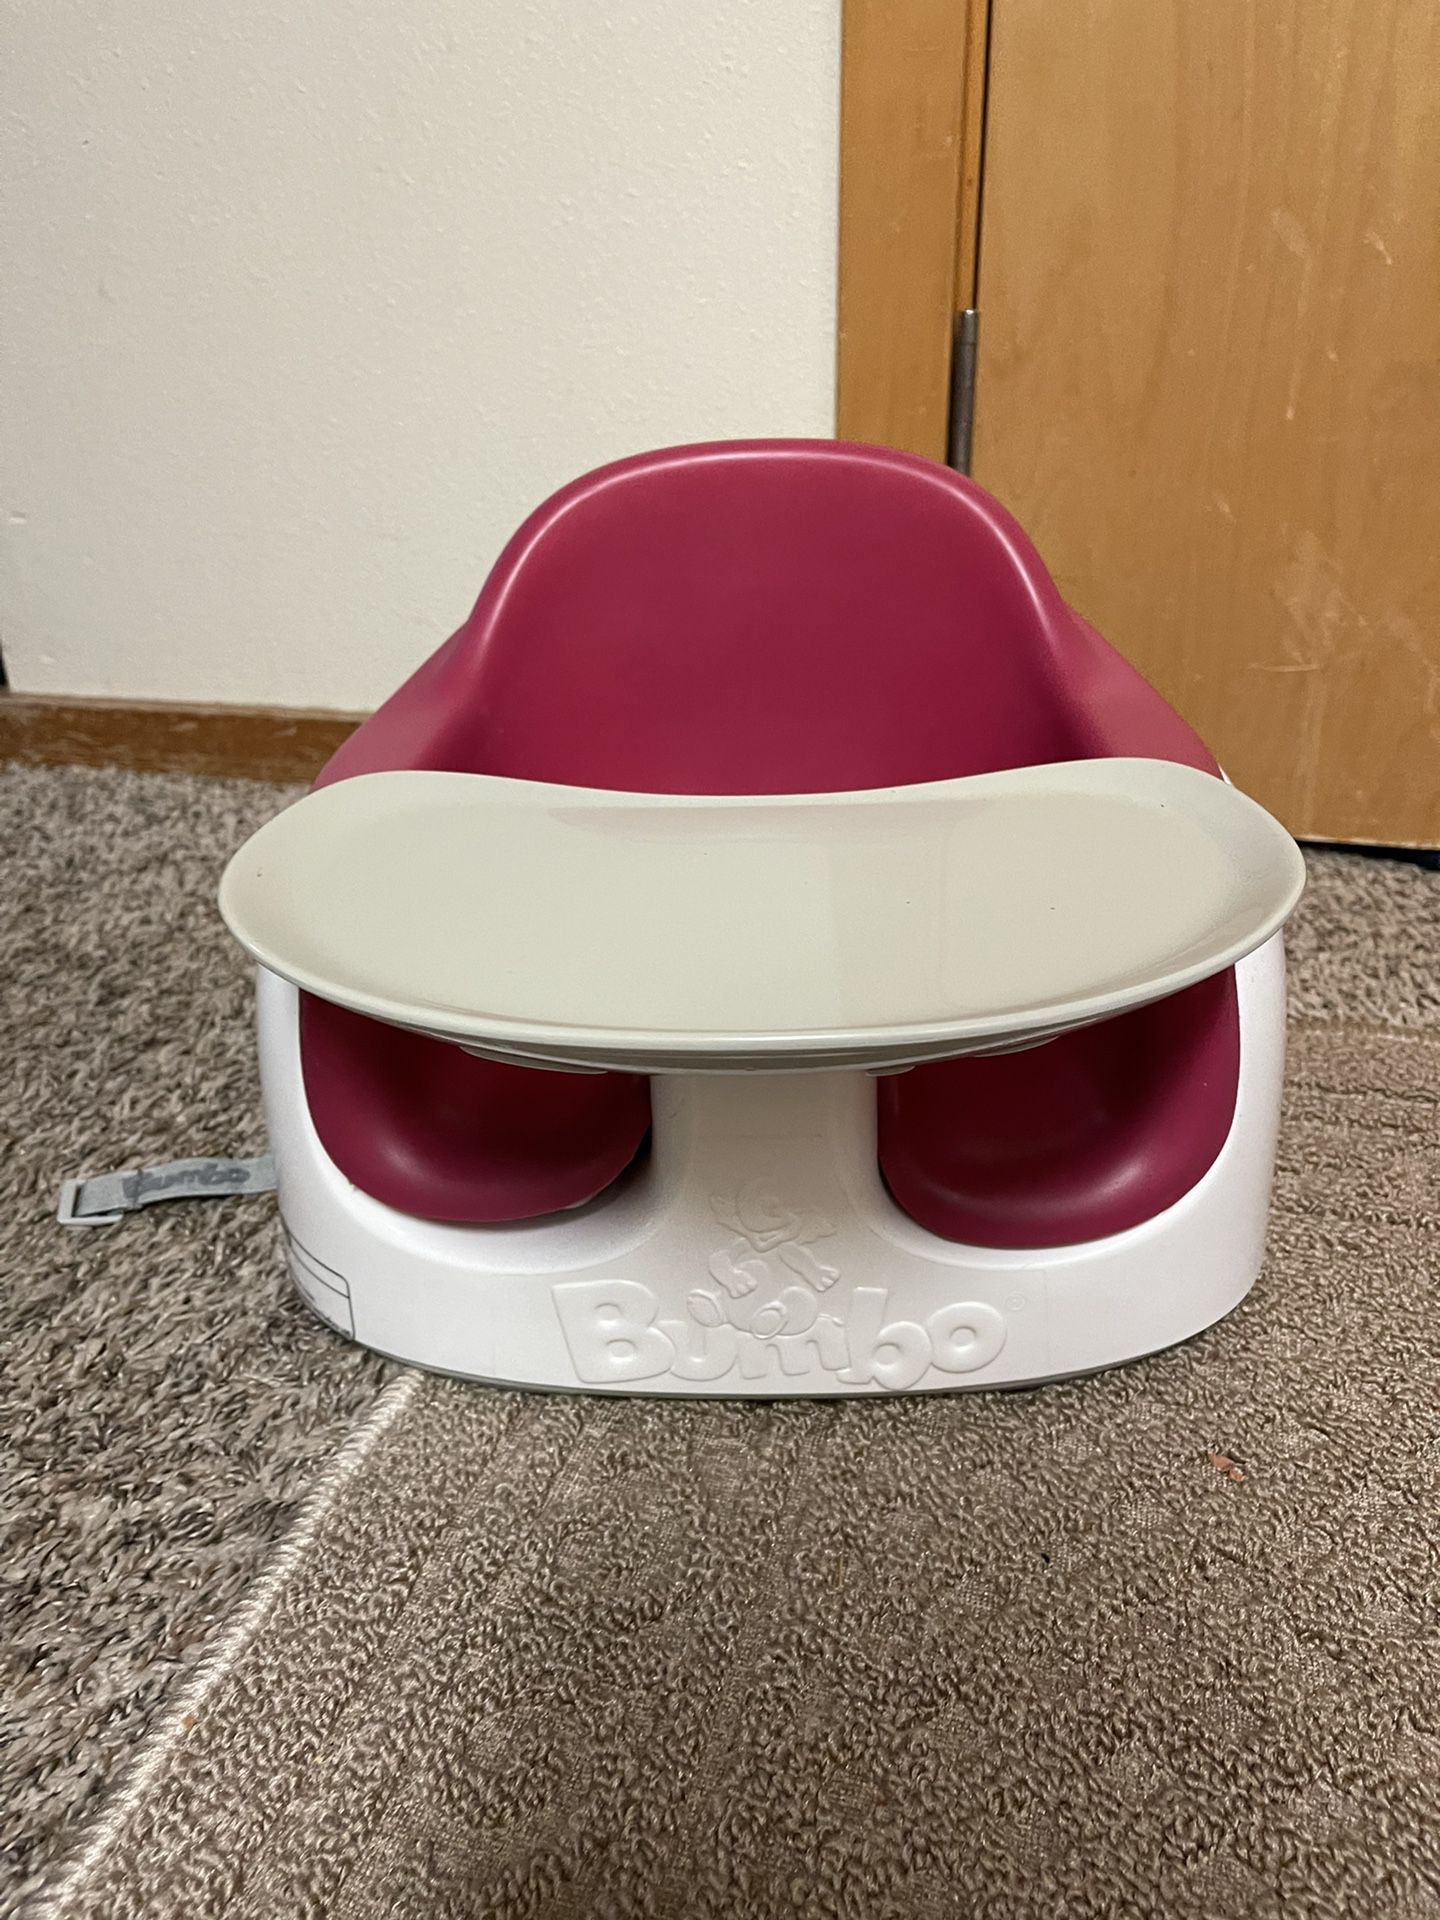 Bumbo Seat For Baby 